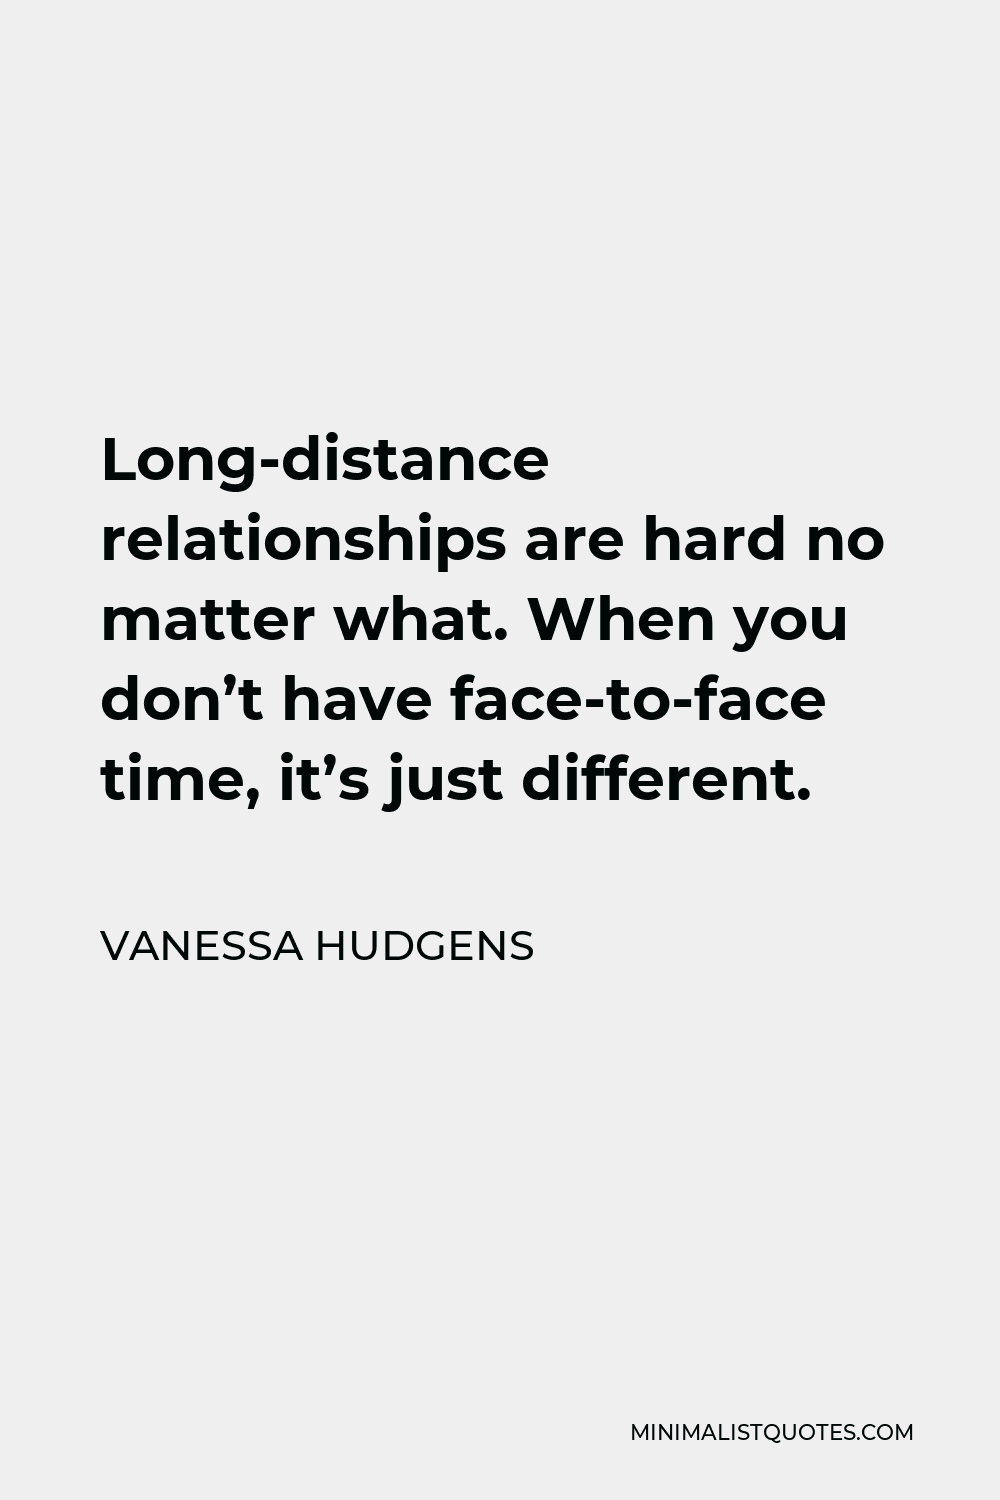 Vanessa Hudgens Quote - Long-distance relationships are hard no matter what. When you don’t have face-to-face time, it’s just different.